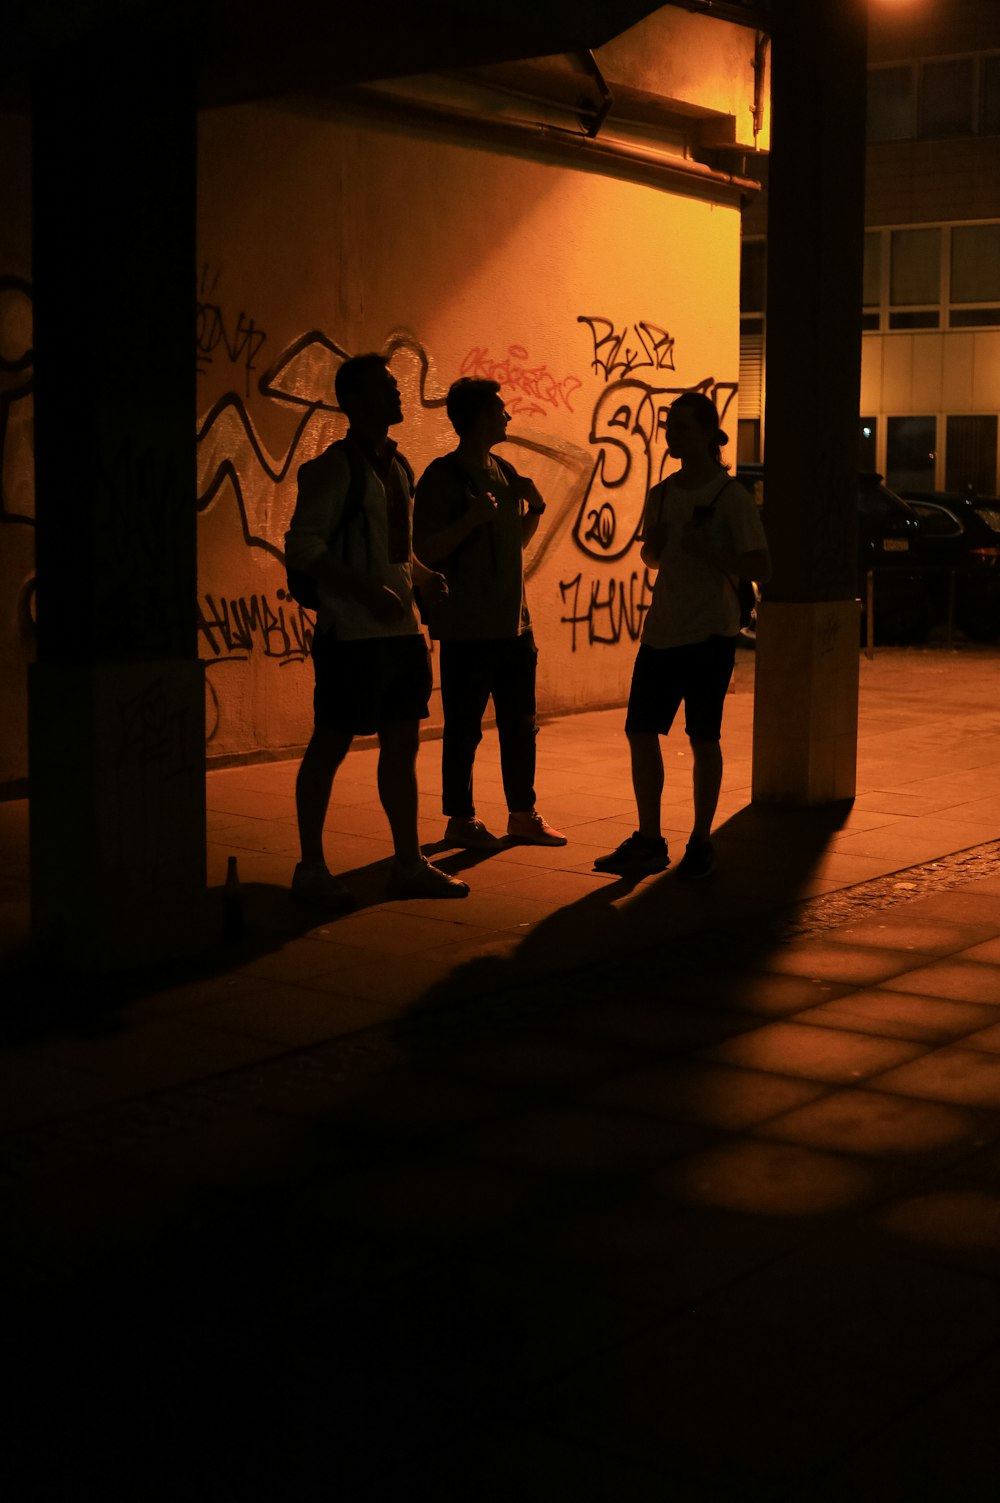 a group of people standing in front of a wall with graffiti